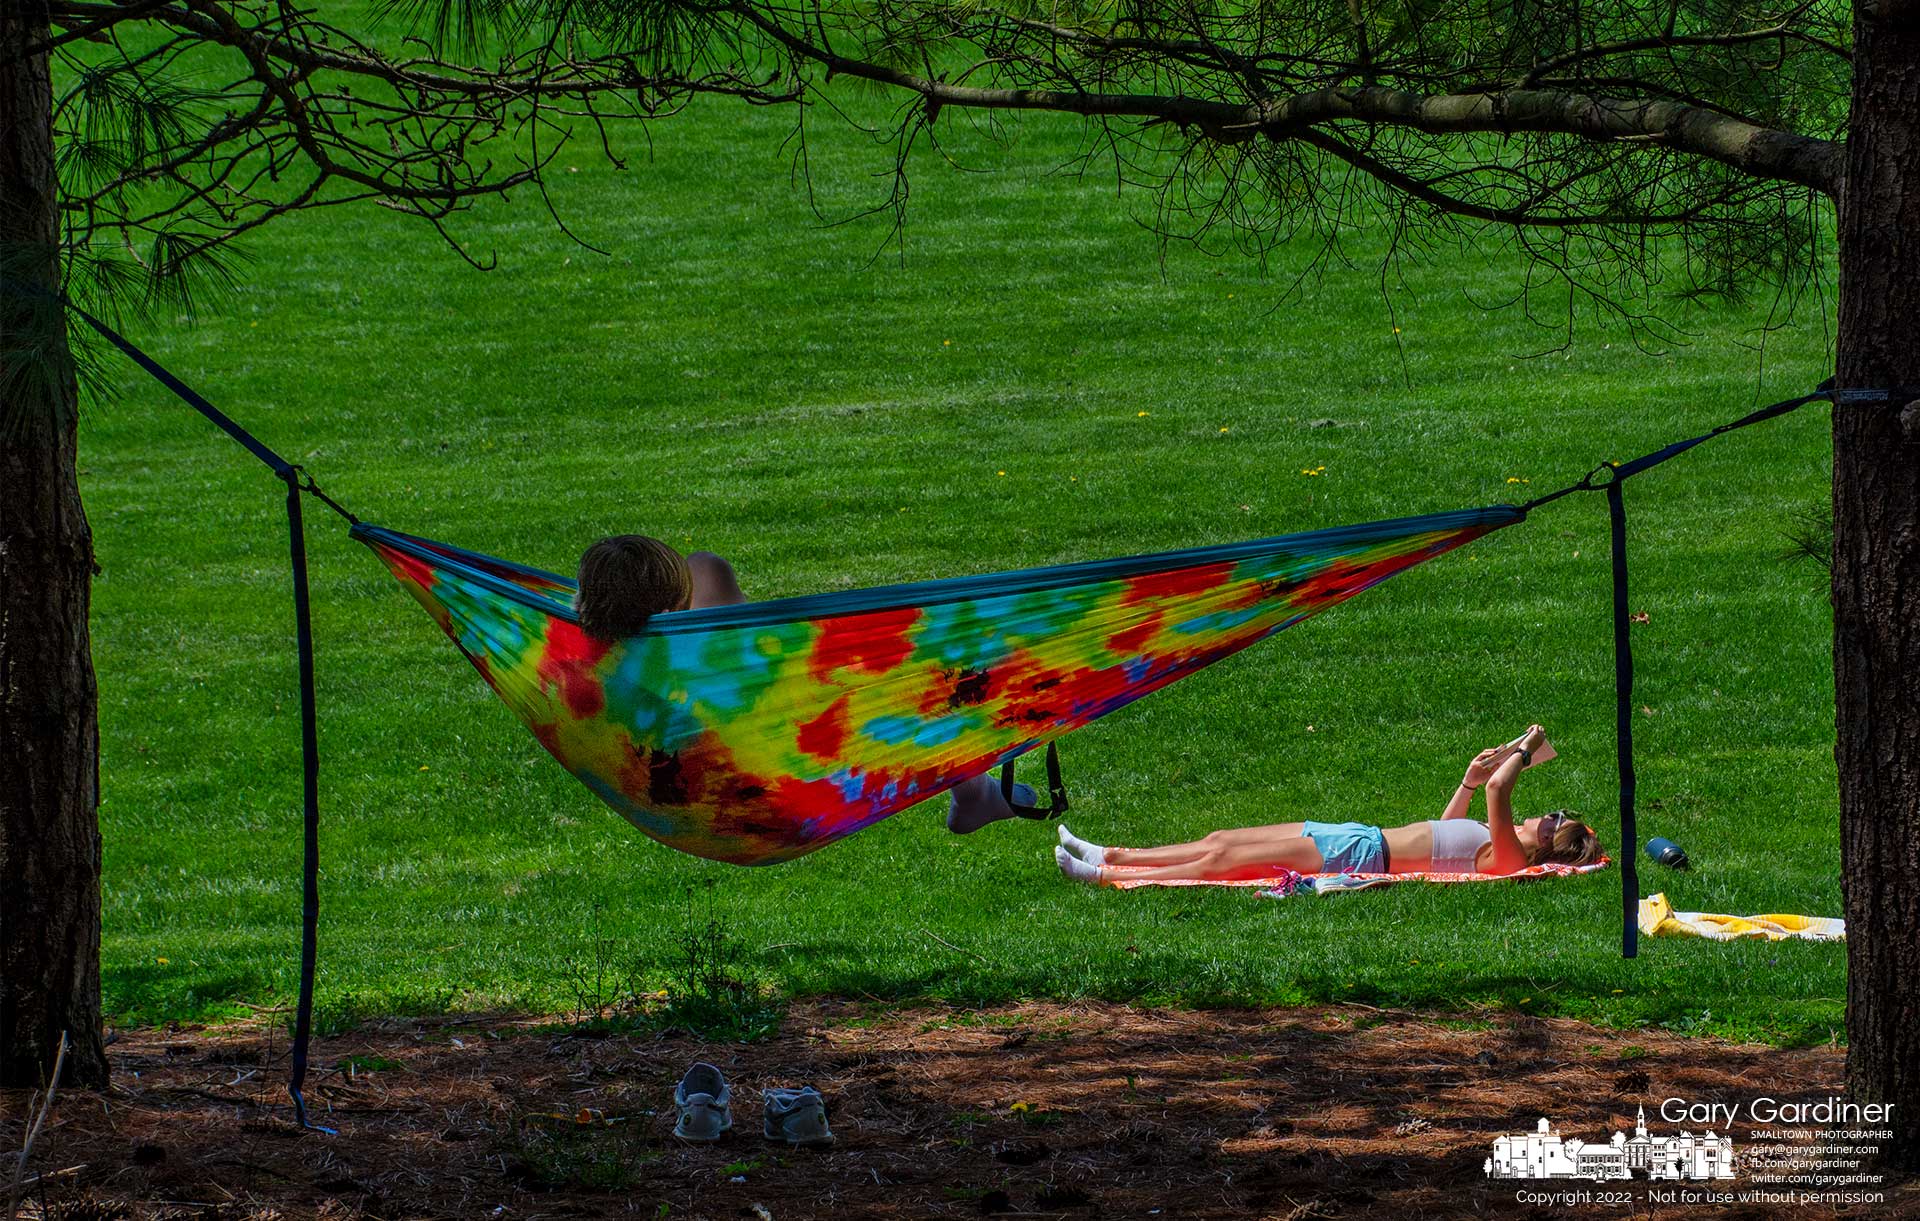 Two young people pick different locations to enjoy the warmest day of Spring with one resting in a shaded hammock as the other reads her book in the warm glow of the sun. My Final Photo for April 23, 2022.